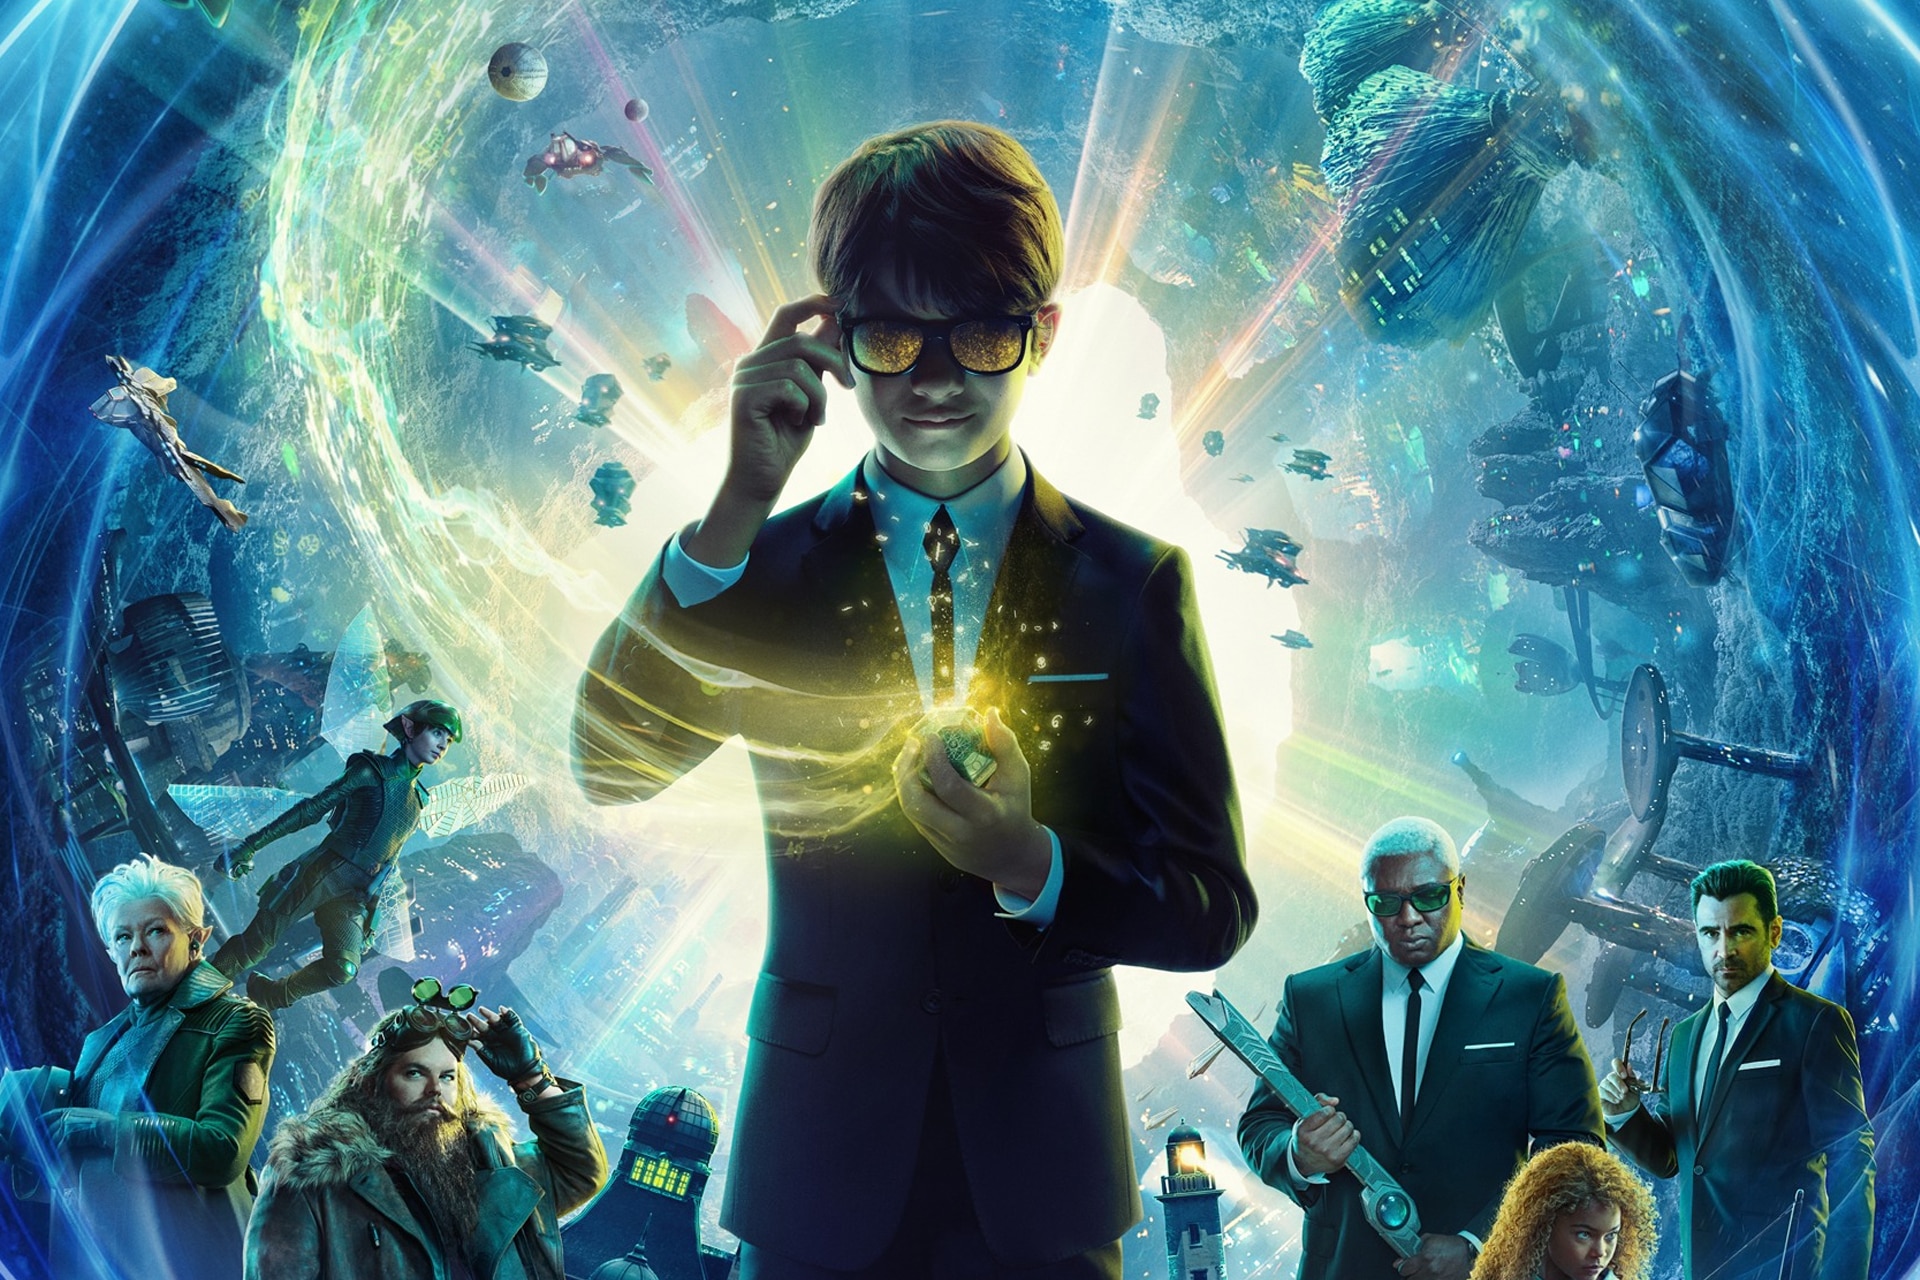 Art and Making of Artemis Fowl (Disney Editions Deluxe)